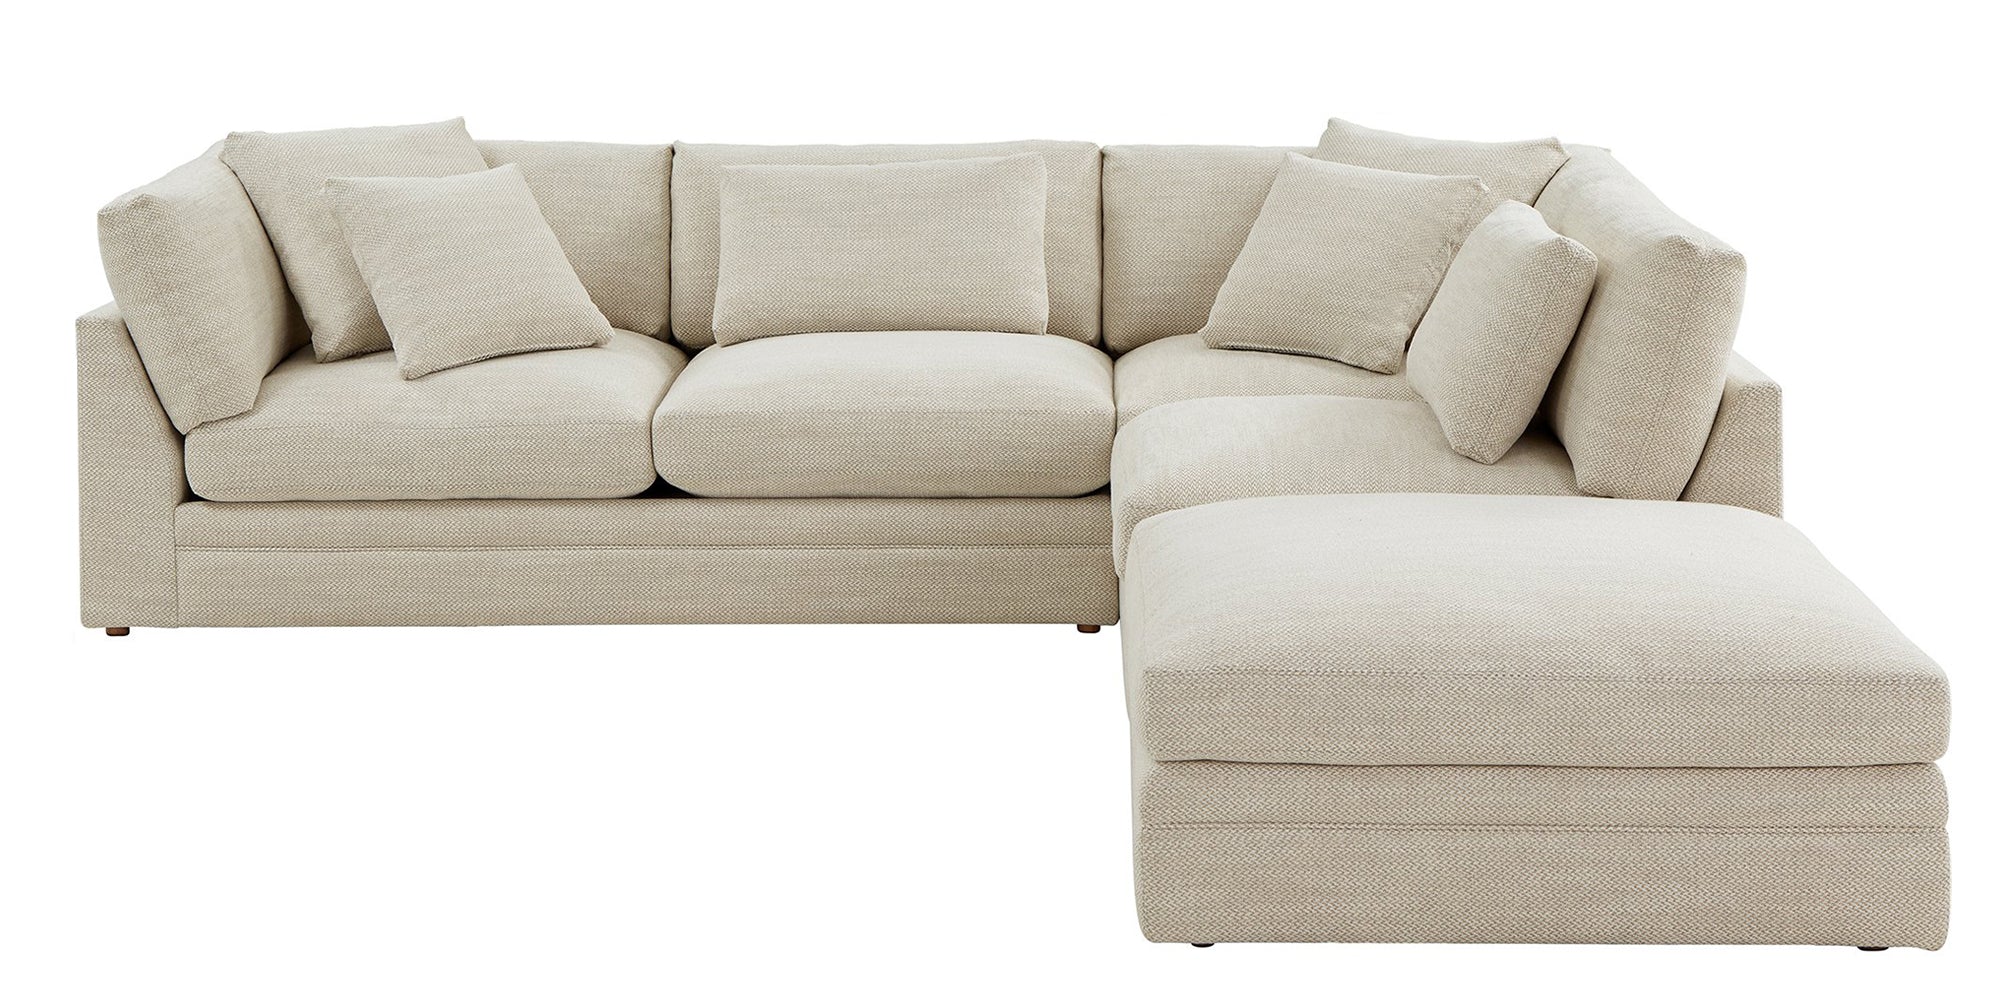 Feel Good Sectional with Ottoman, Right, Oyster - Image 1